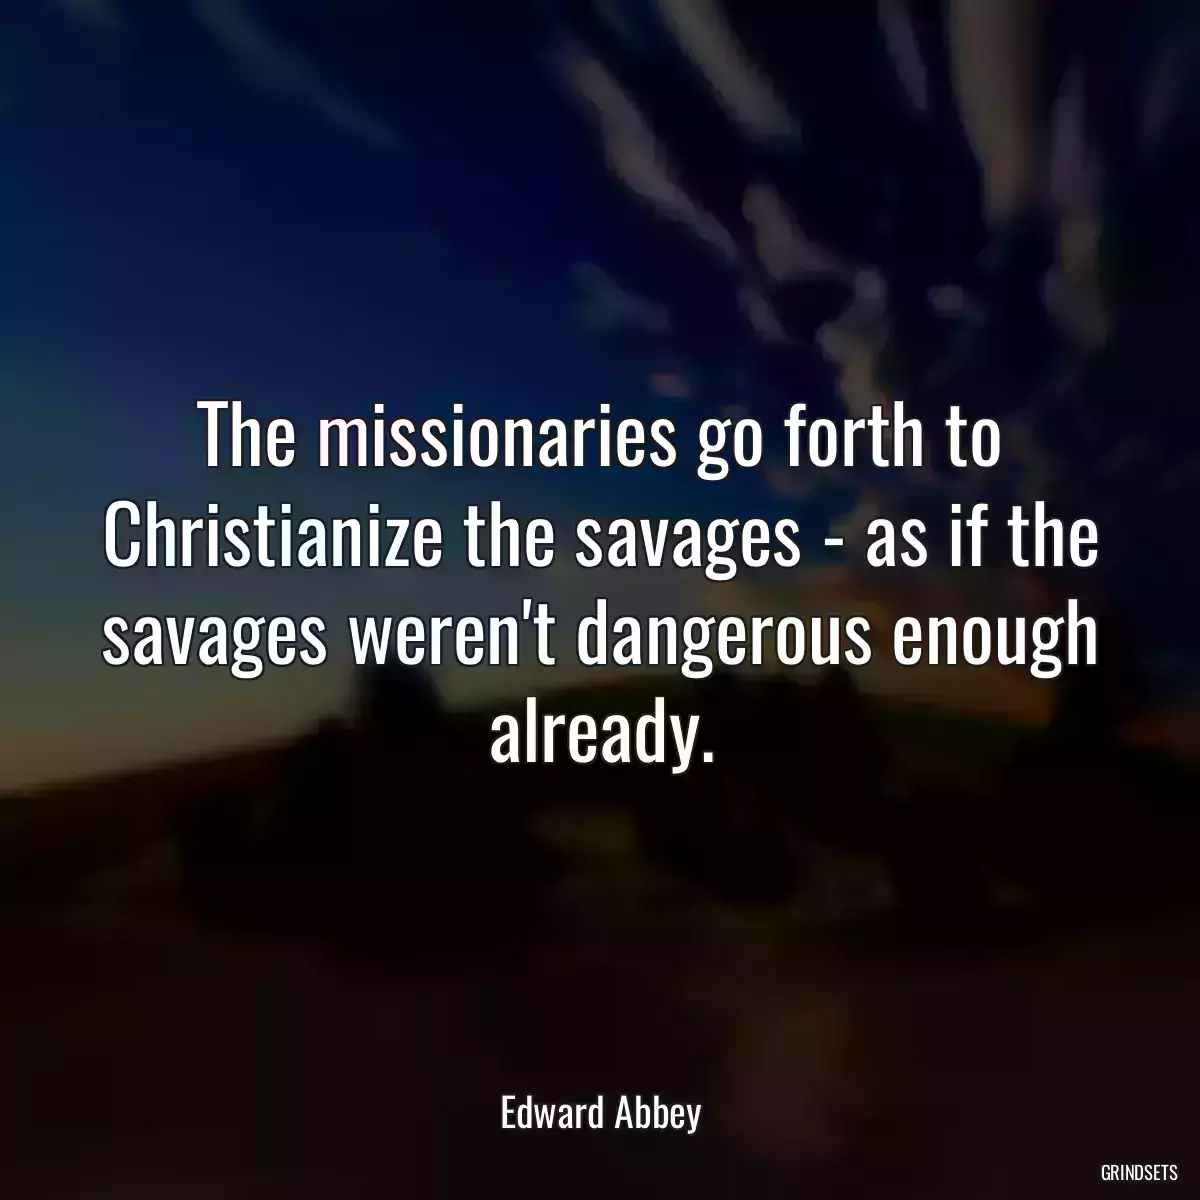 The missionaries go forth to Christianize the savages - as if the savages weren\'t dangerous enough already.